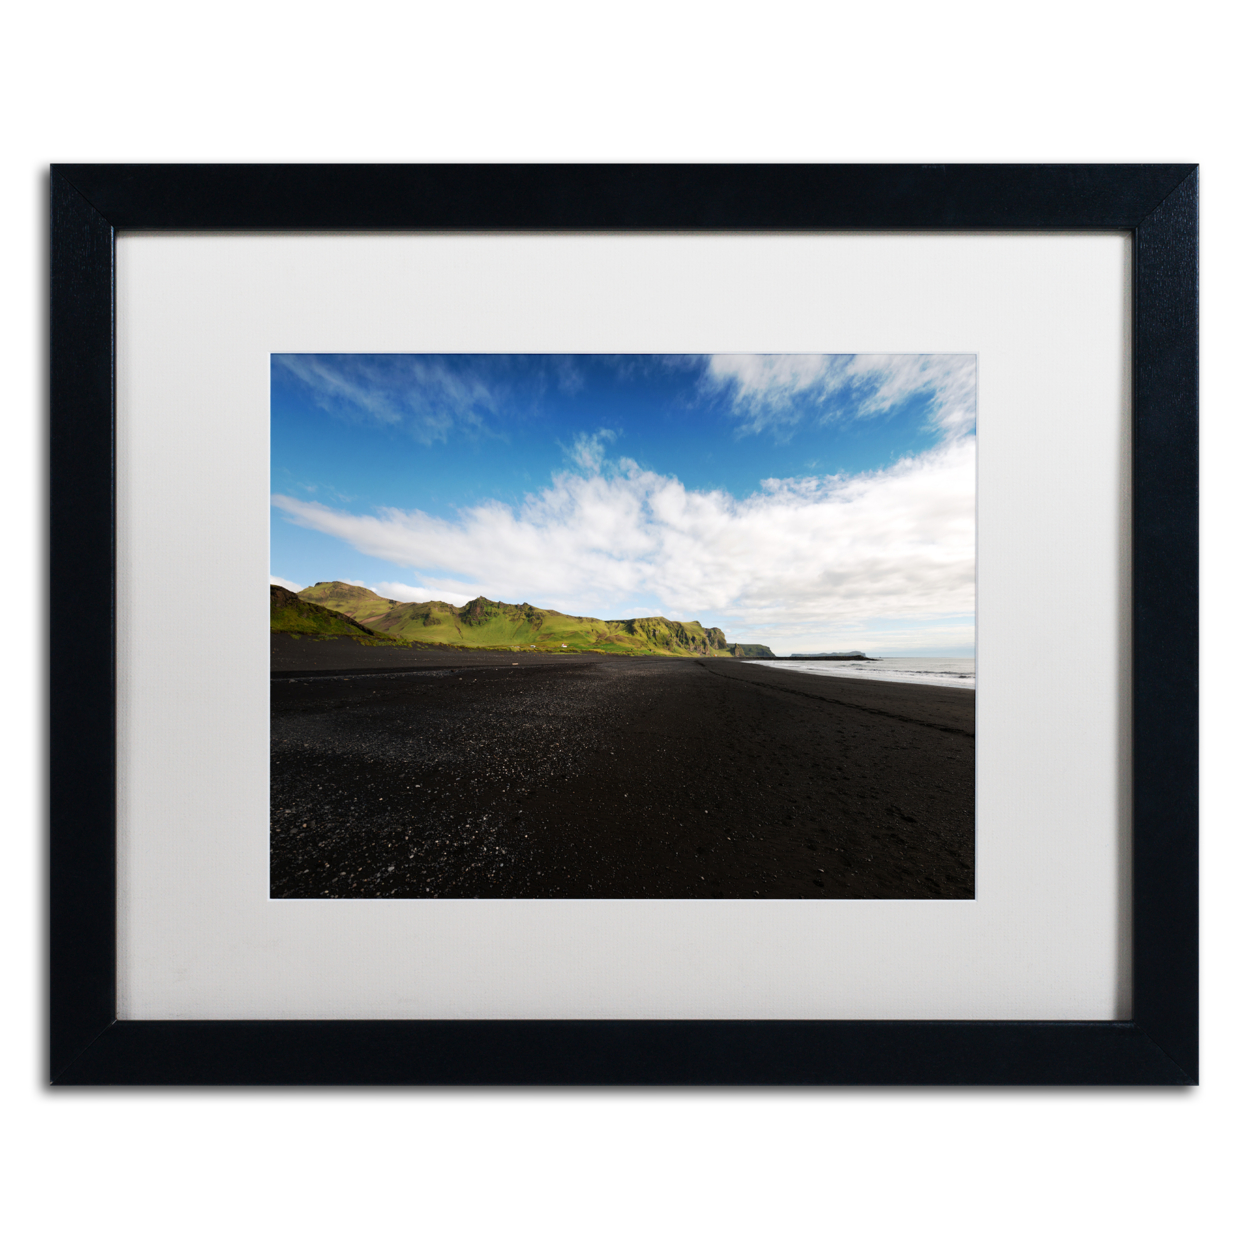 Philippe Sainte-Laudy 'Walking On The Black Beach' Black Wooden Framed Art 18 X 22 Inches